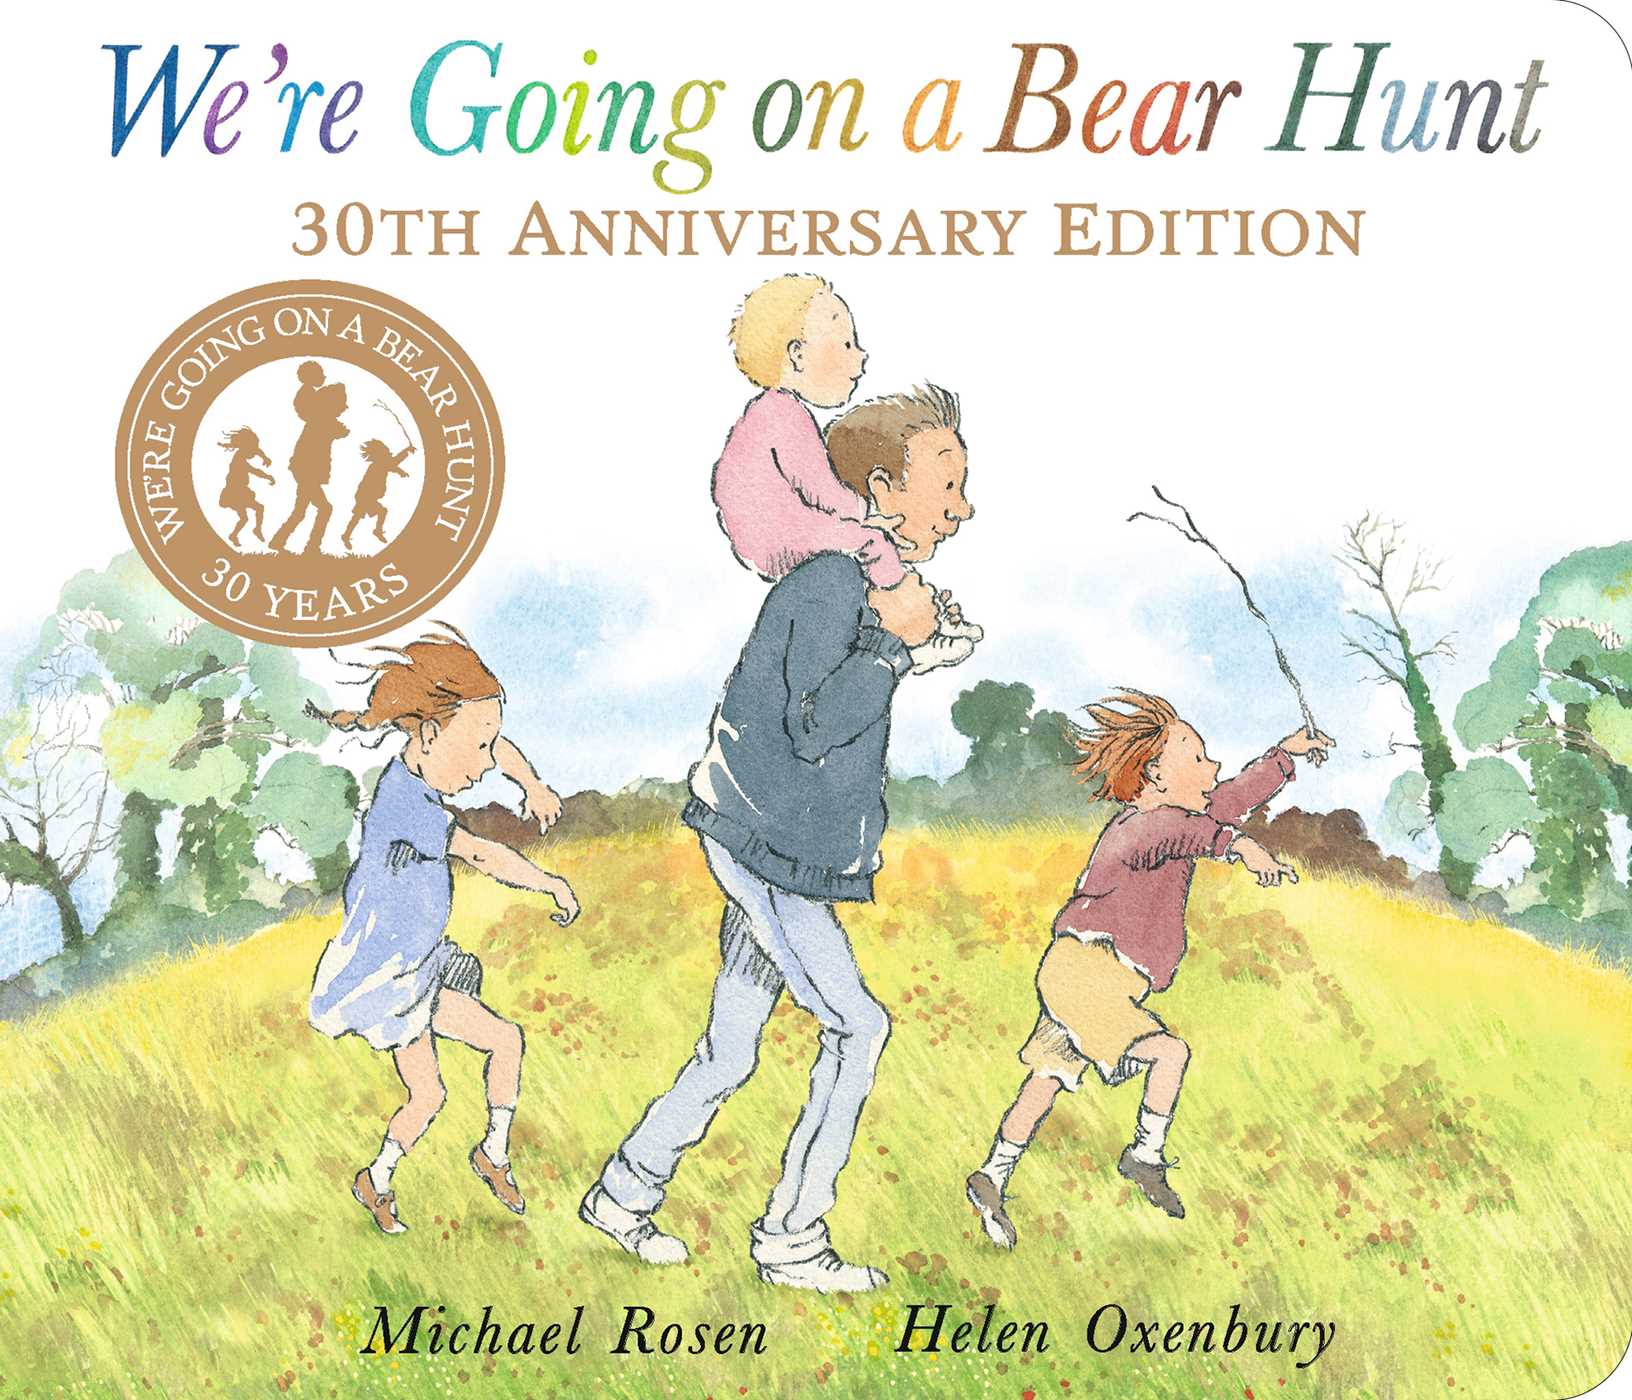 We're Going on a Bear Hunt 30th Anniversary Edition